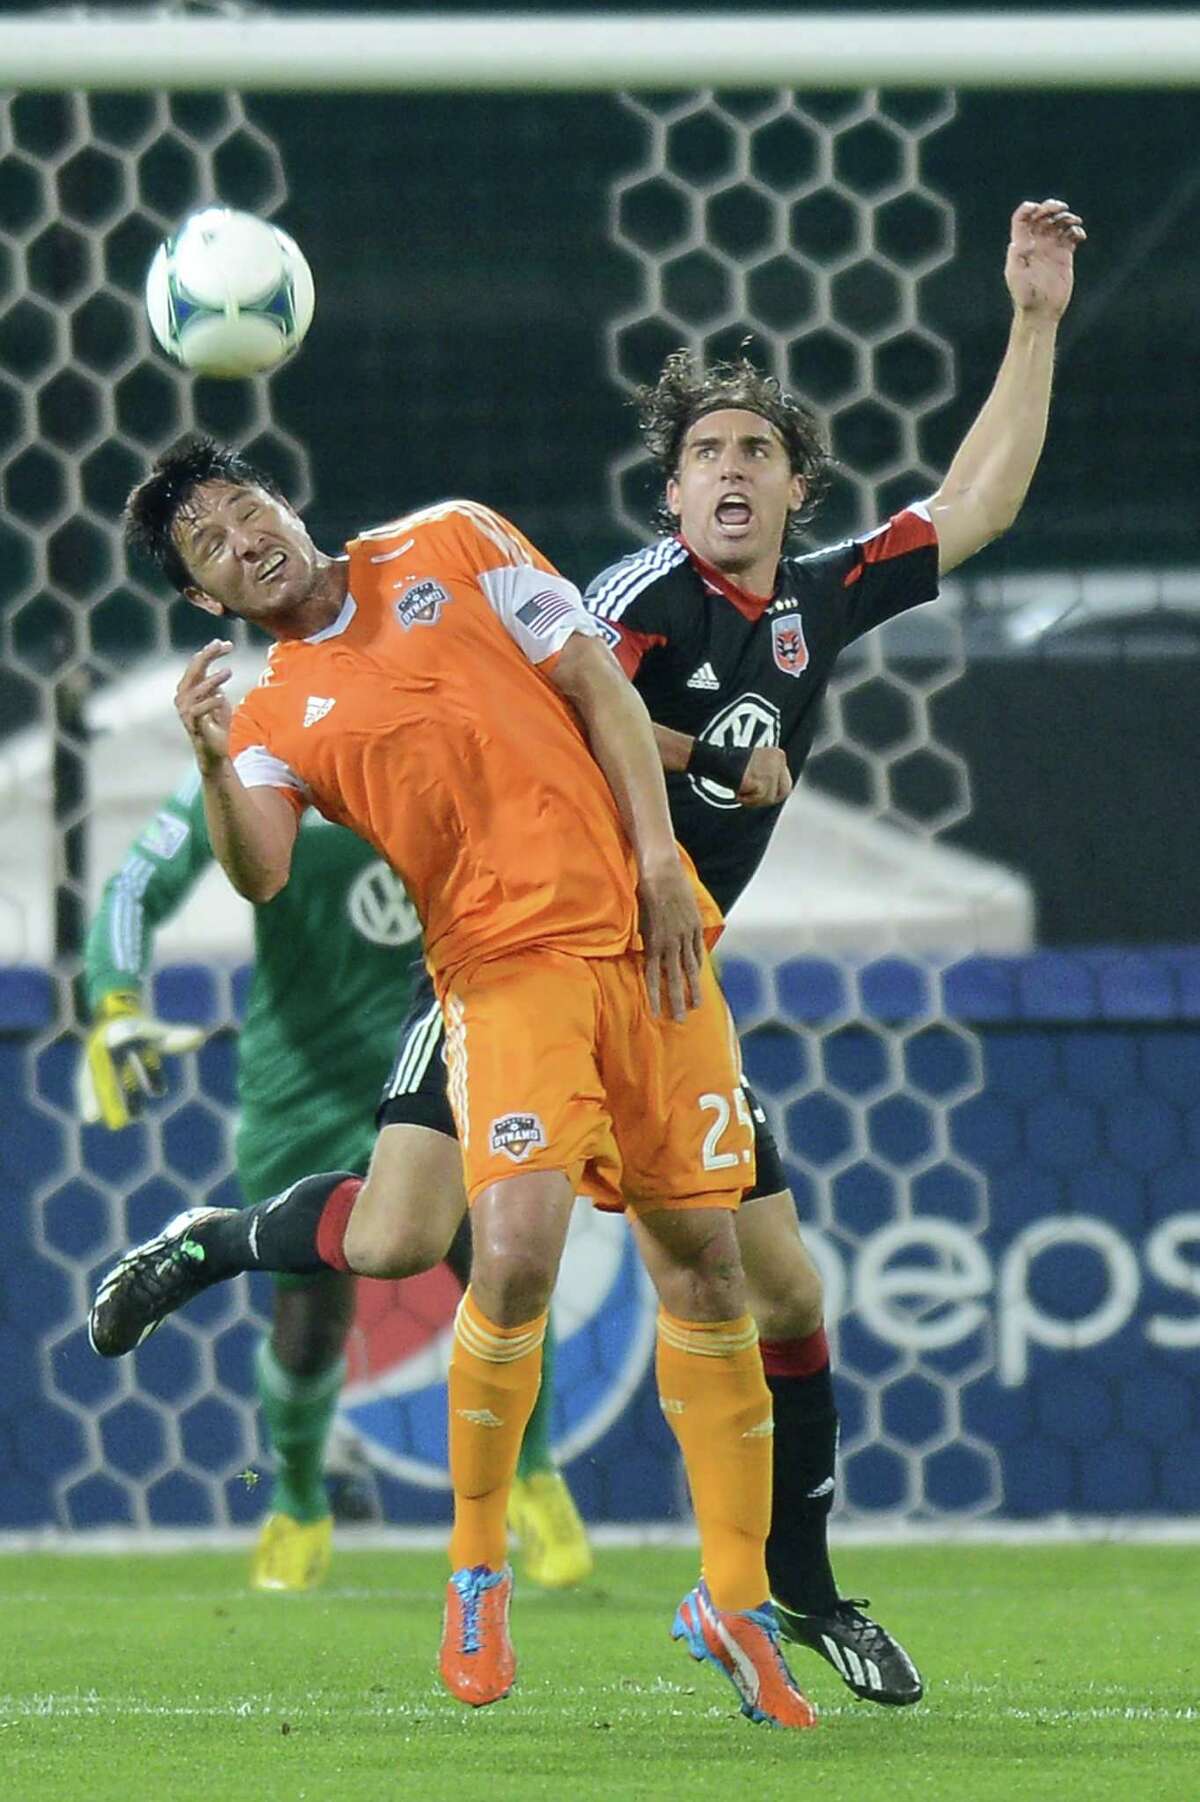 Houston Dynamo forward Brian Ching (25) and D.C. United defender Dejan Jakovic (5) battle for a head ball in the second half at RFK Stadium in Washington, D.C., Wednesday, May 8, 2013. Dynamo blanked United, 4-0. (Chuck Myers/MCT)